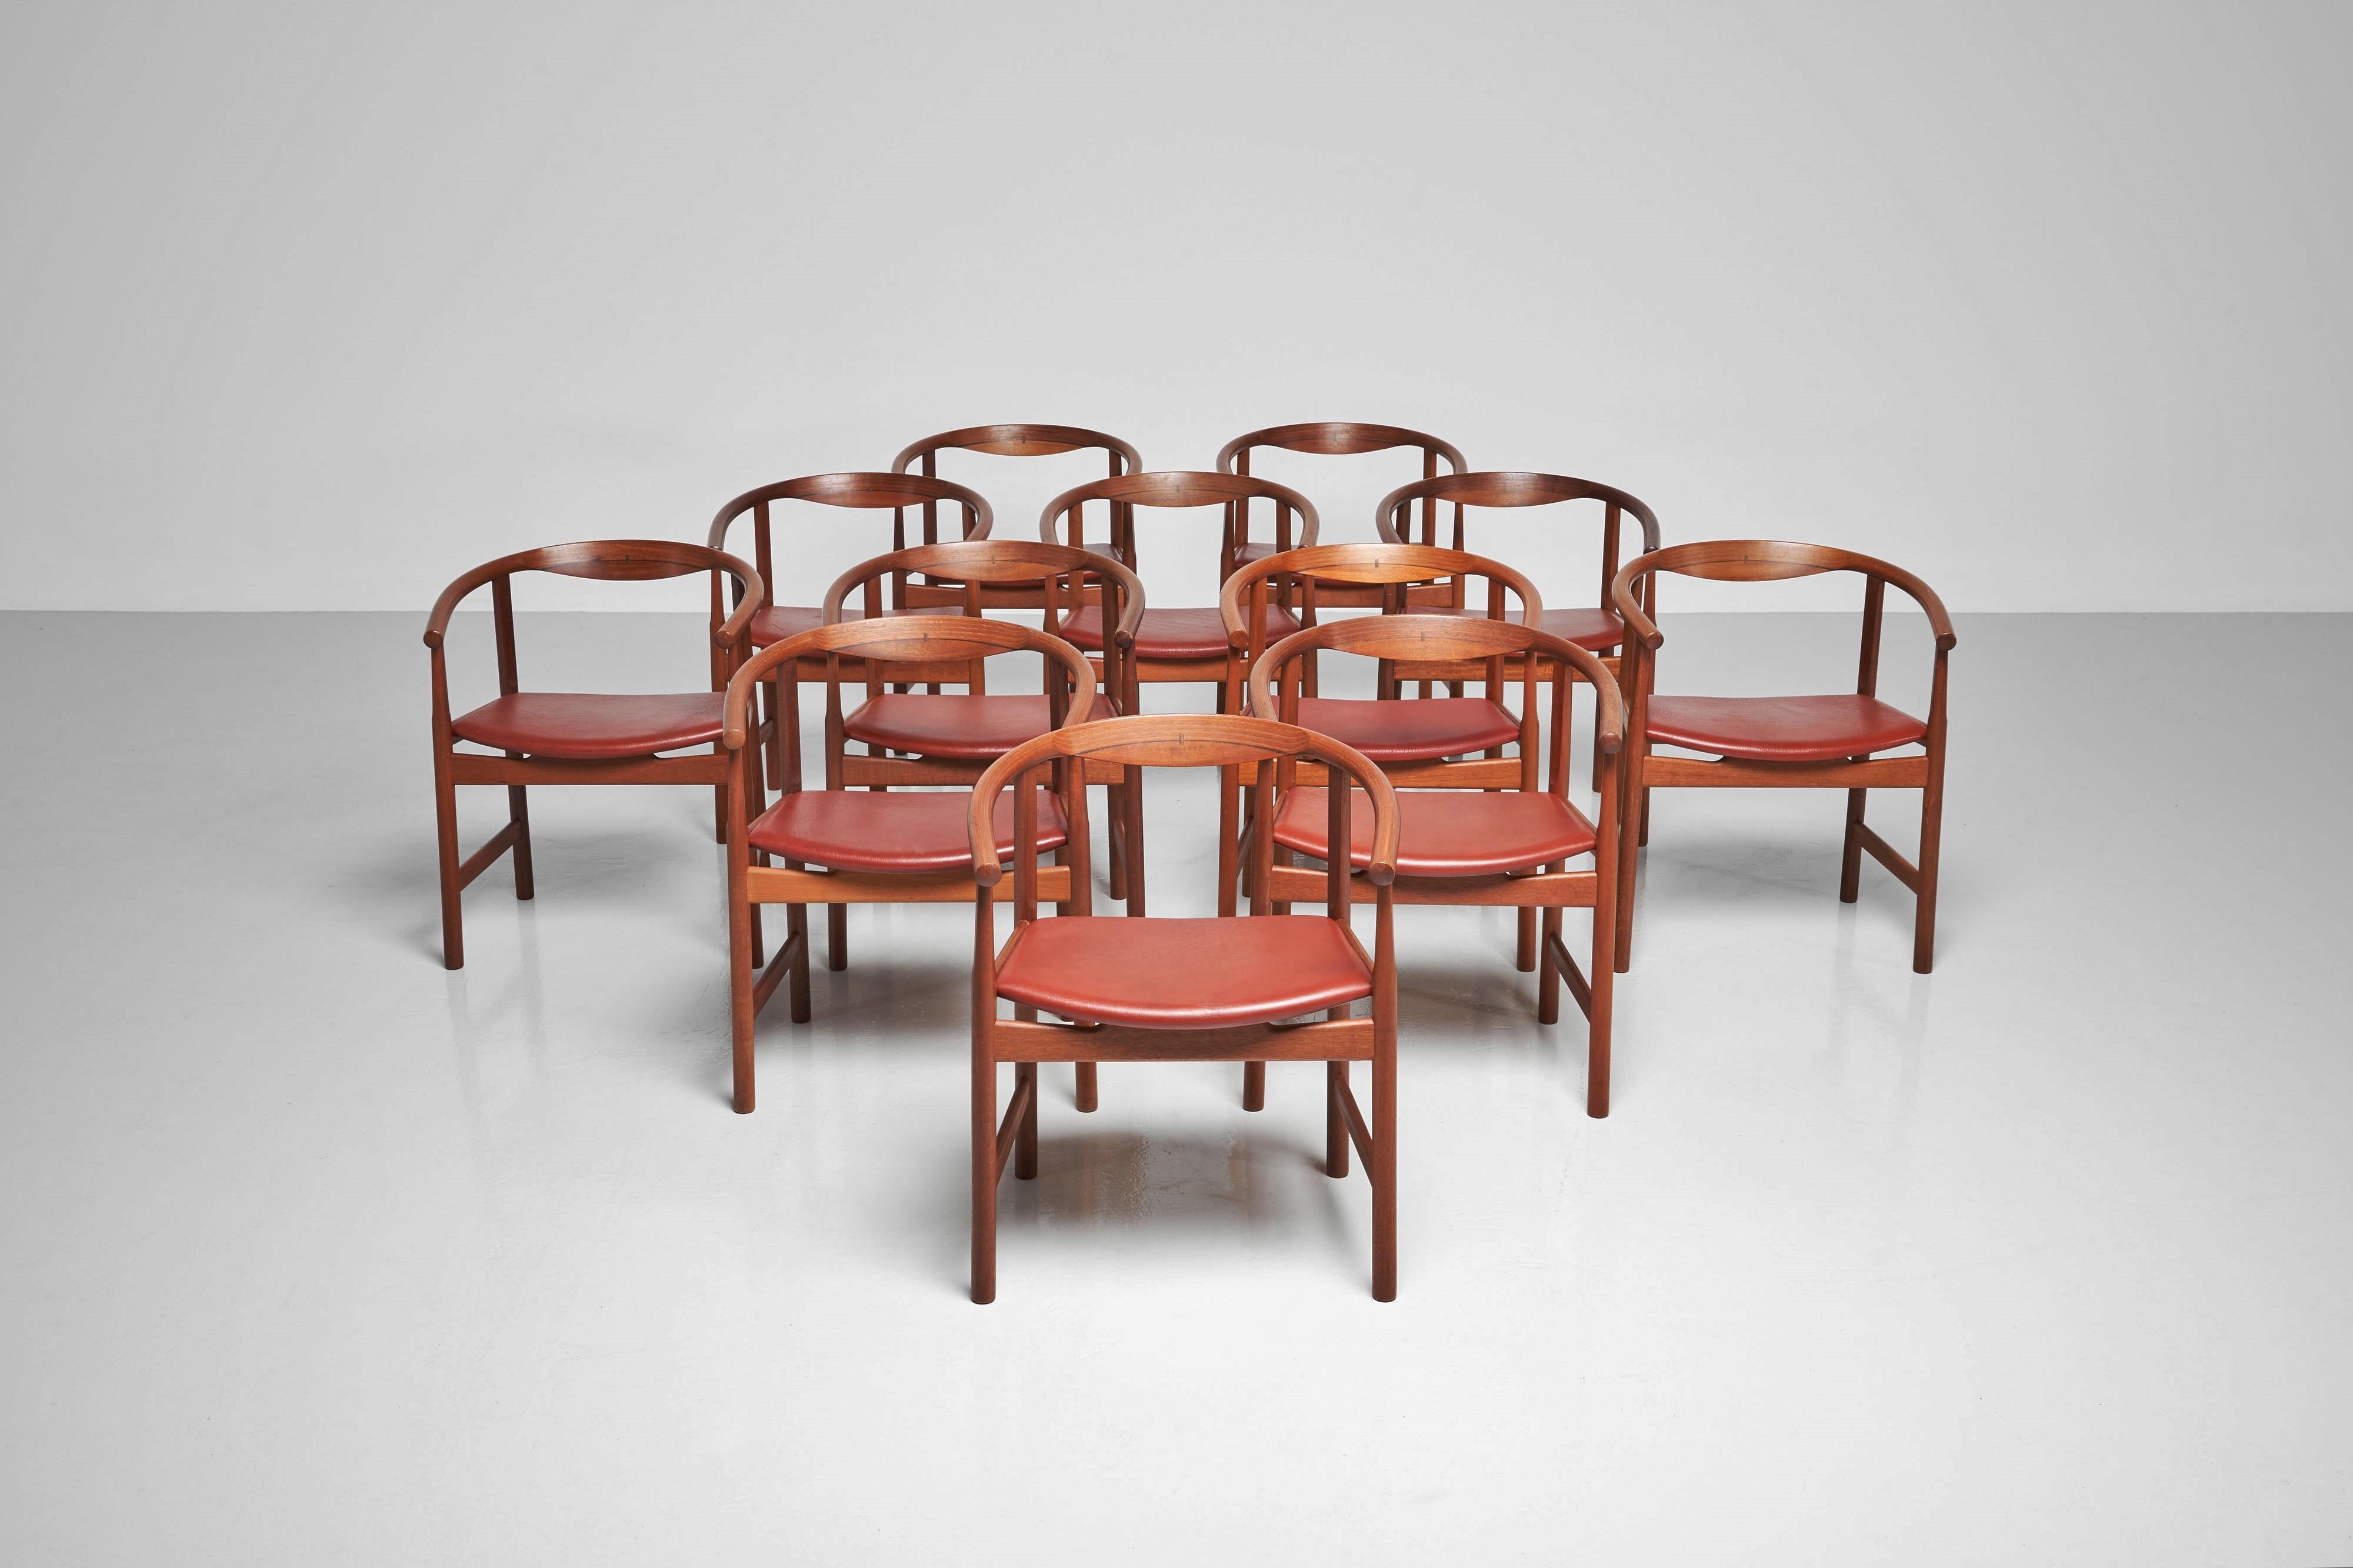 Iconic Hans J. Wegner PP203 dining chairs, crafted by PP Møbler, Denmark in 1969. This set includes 12 extremely rare chairs, making it a remarkable find. These chairs showcase Wegner's exceptional woodworking skills, with careful attention to